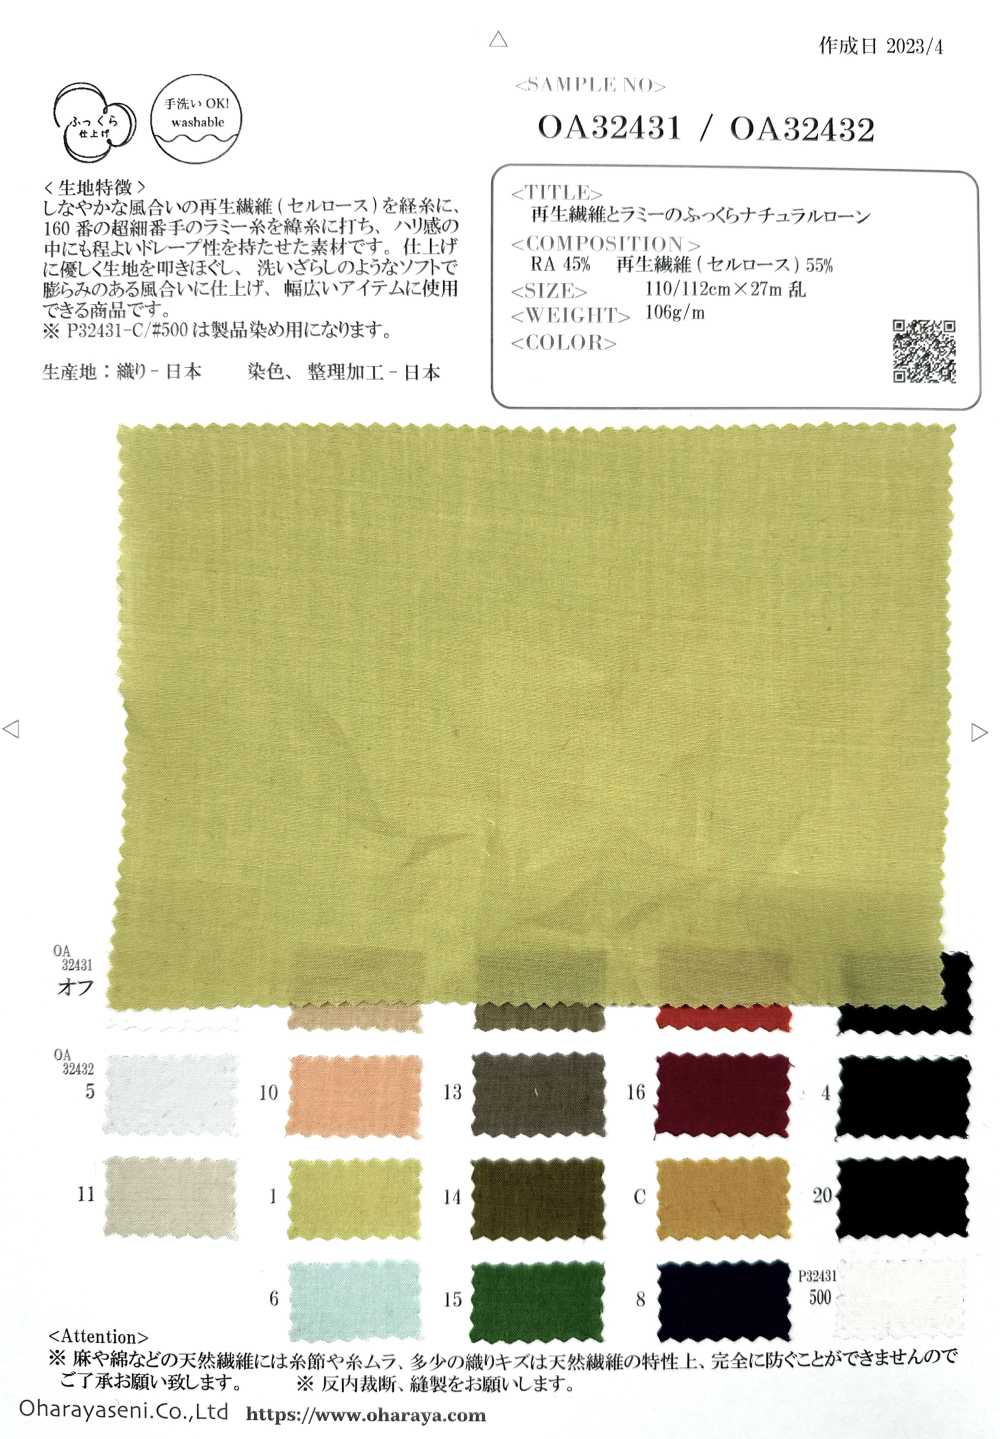 OA32432 Plump Natural Lawn Made From Recycled Fibers And Ramie[Textile / Fabric] Oharayaseni